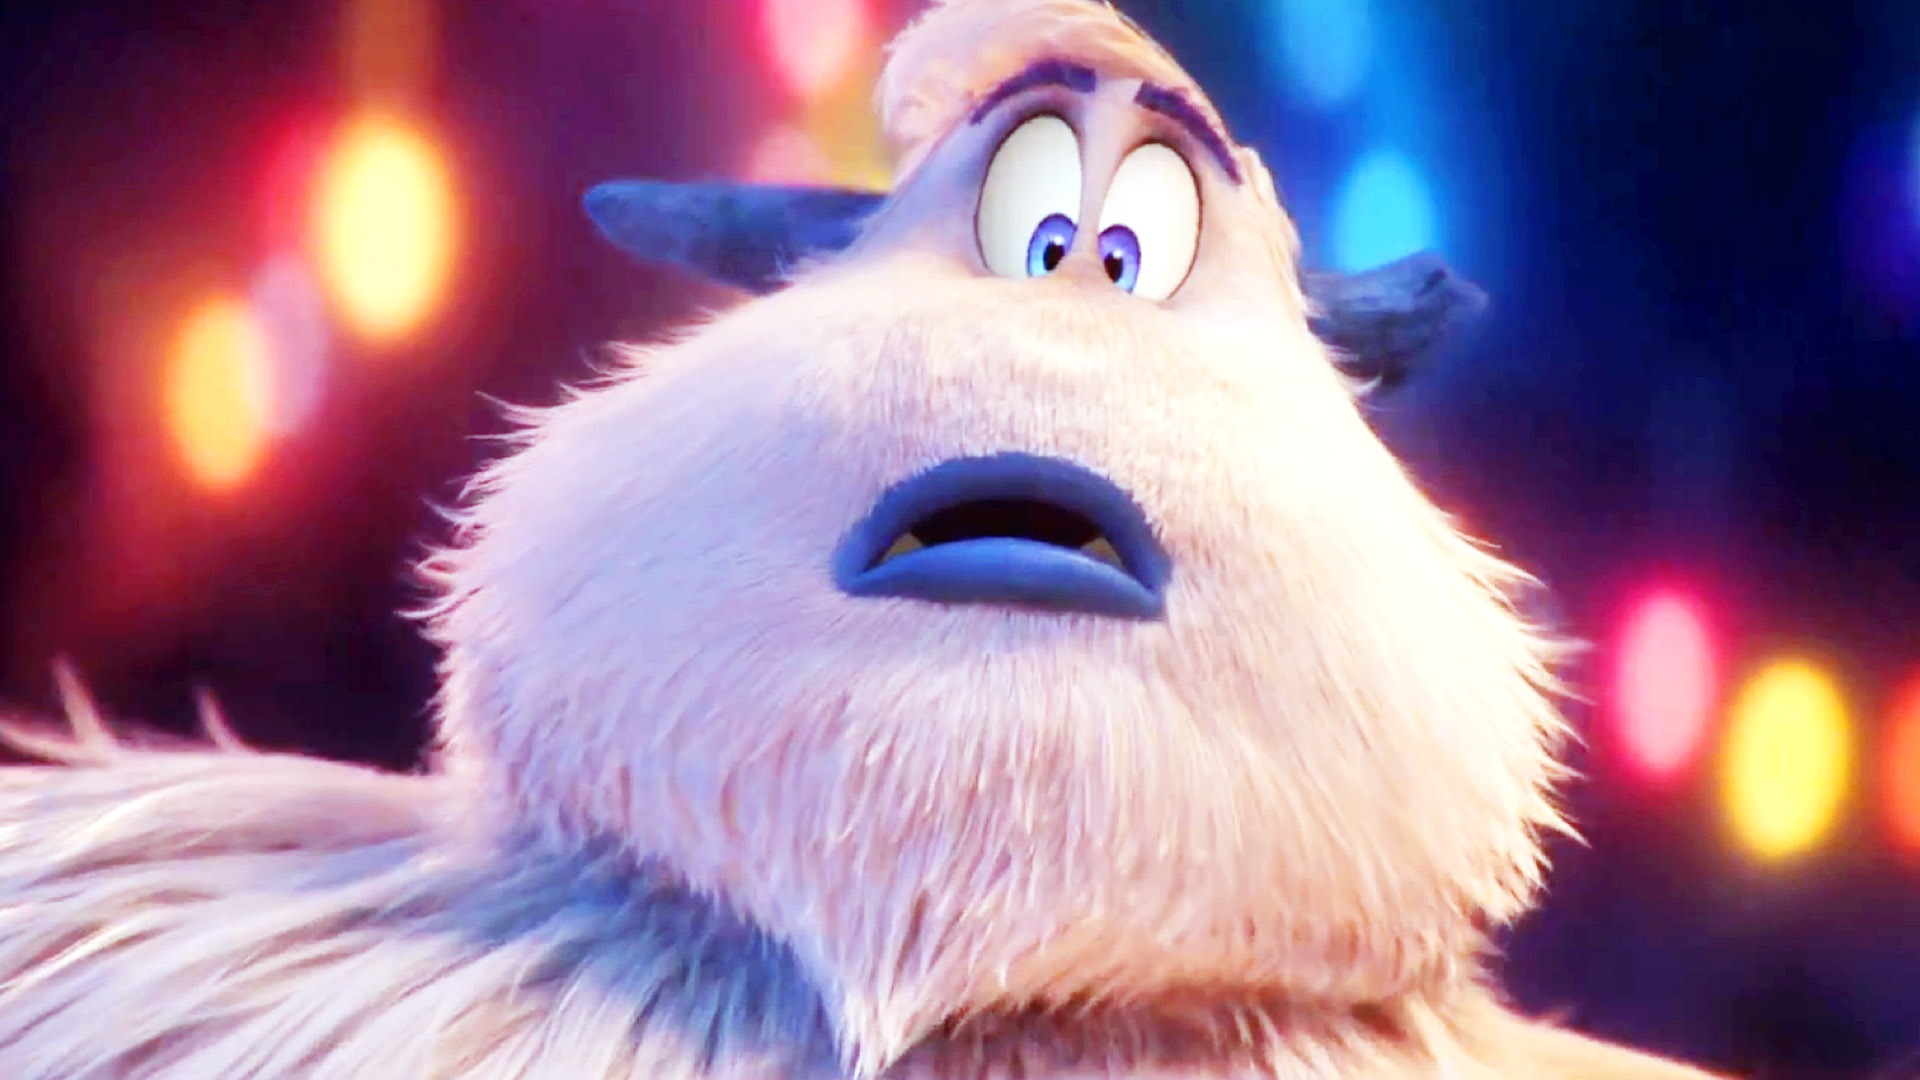 SMALLFOOT - Official Trailer 1 